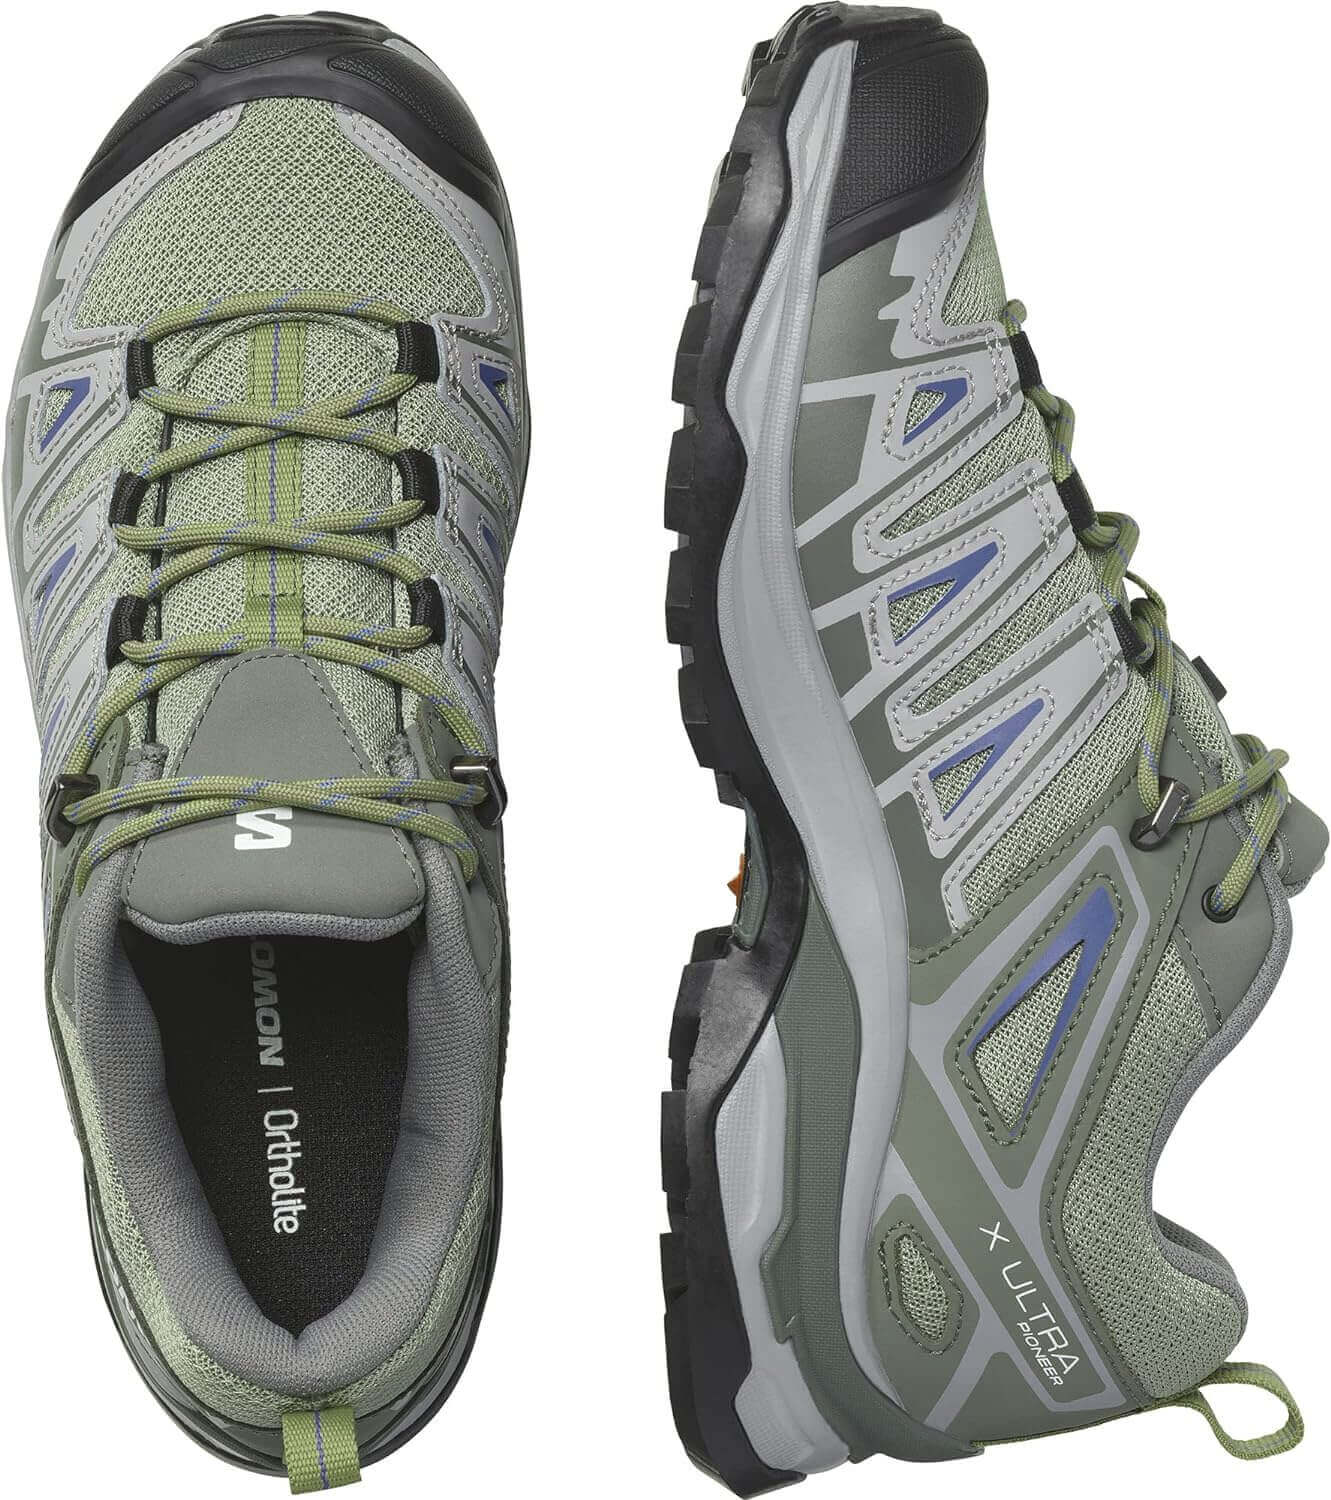 Shop The Latest >Salomon Women's X Ultra Pioneer Waterproof Hiking Shoes > *Only $112.06*> From The Top Brand > *Salomonl* > Shop Now and Get Free Shipping On Orders Over $45.00 >*Shop Earth Foot*